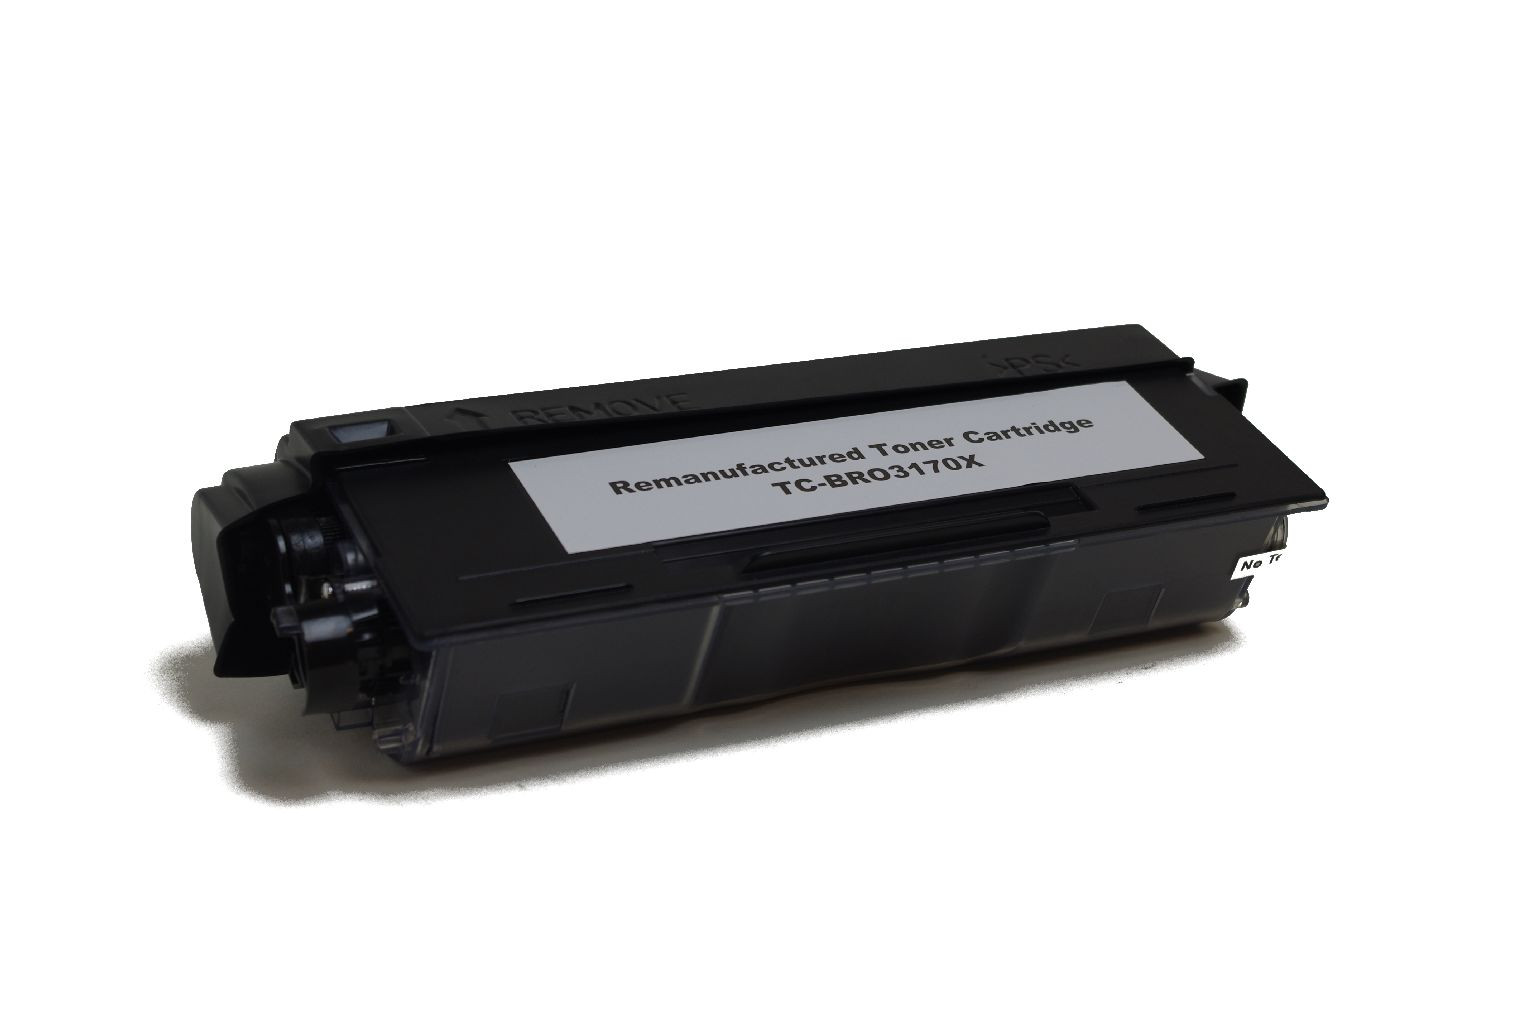 Toner cartridge (alternative) compatible with Brother DCP 8070/8085/8880/8890 HL 5340/5350/5370/5380 MFC 8370/8380/8880/8890  TN3280 / TN 3280